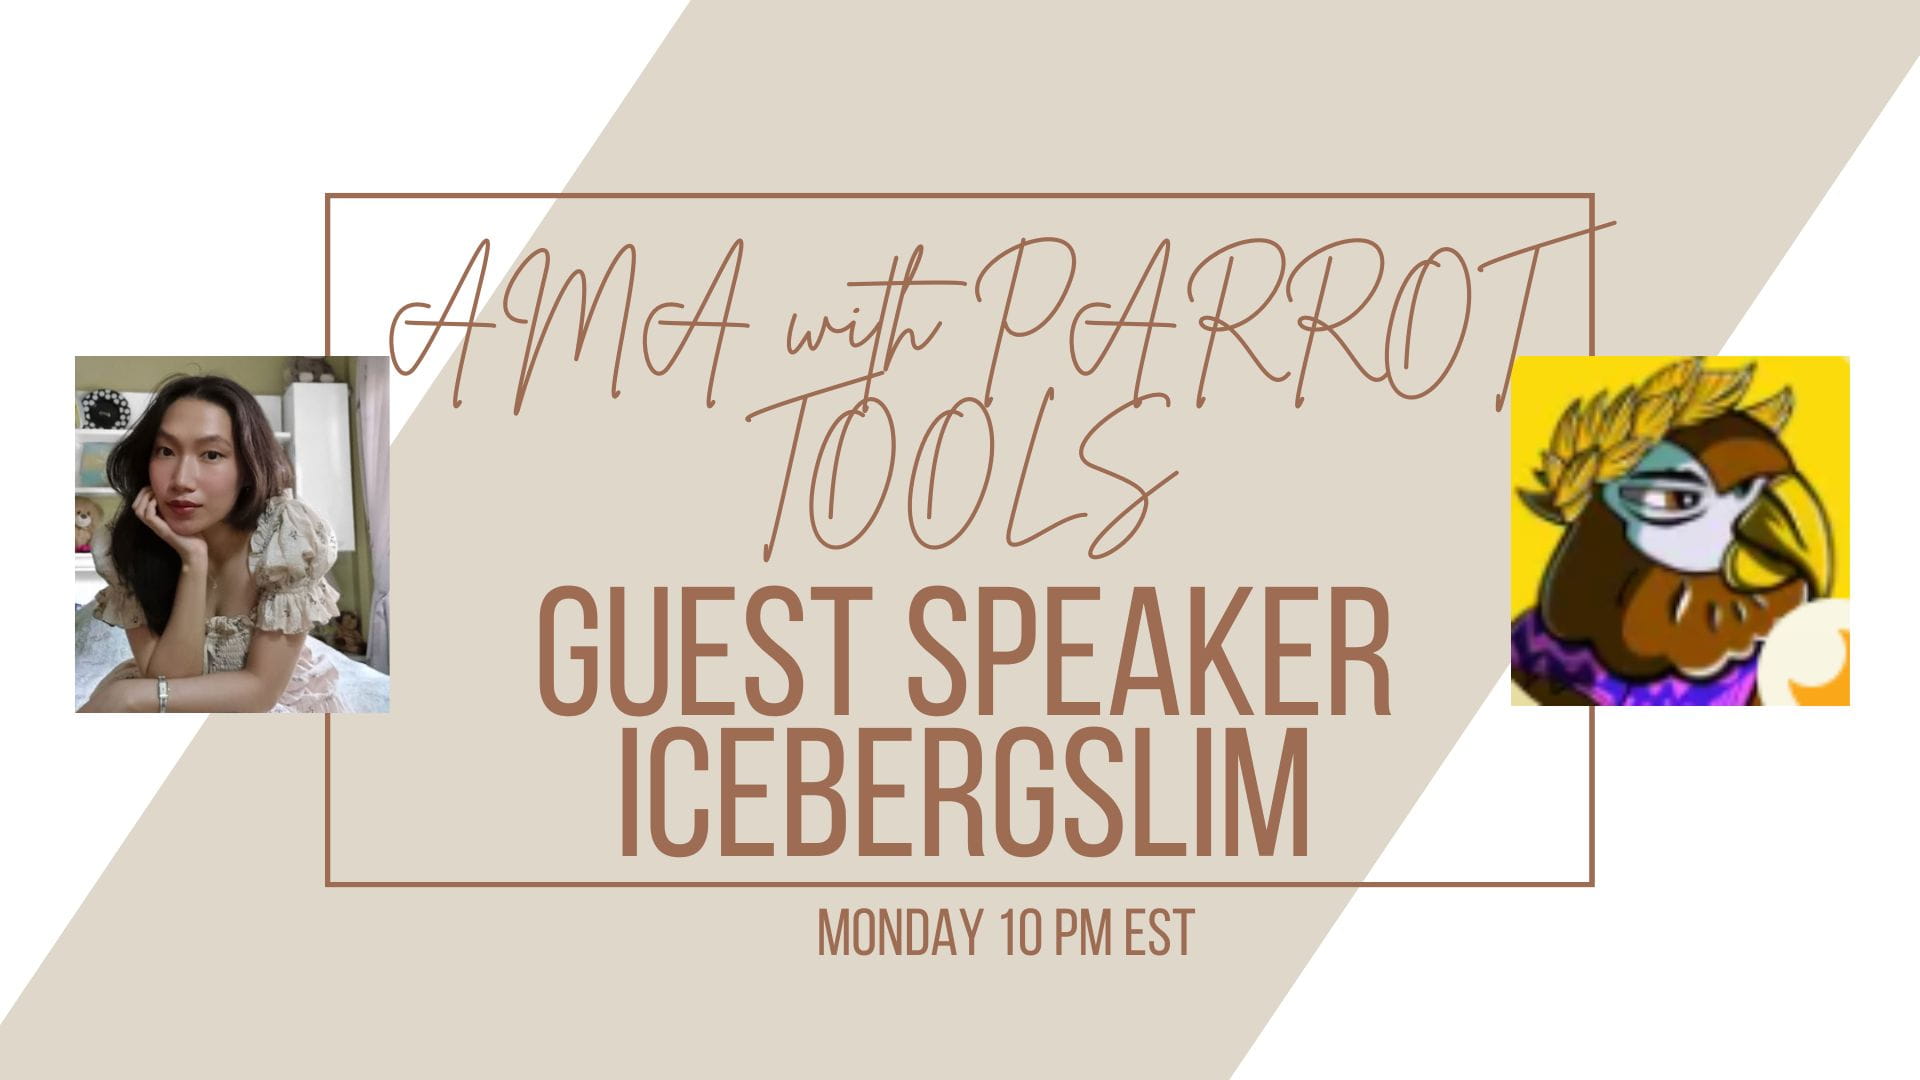 AMA with Parrot Tools at 10PM EST | Lets support Parrot tools!